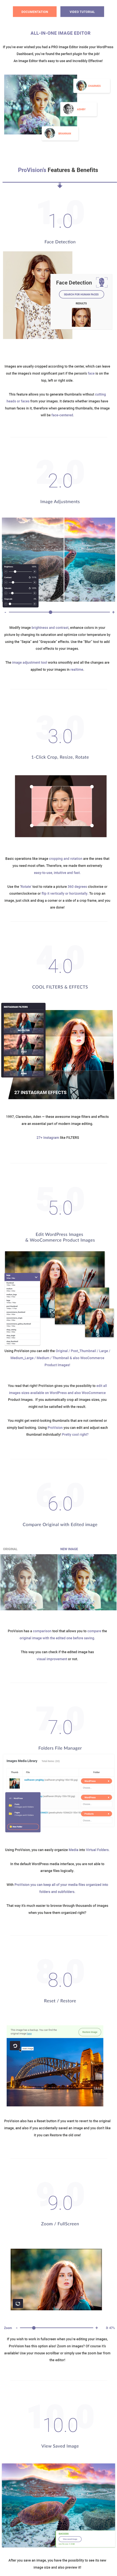 ProVision Image Editor for WordPress / WooCommerce with Folders File Manager - 1